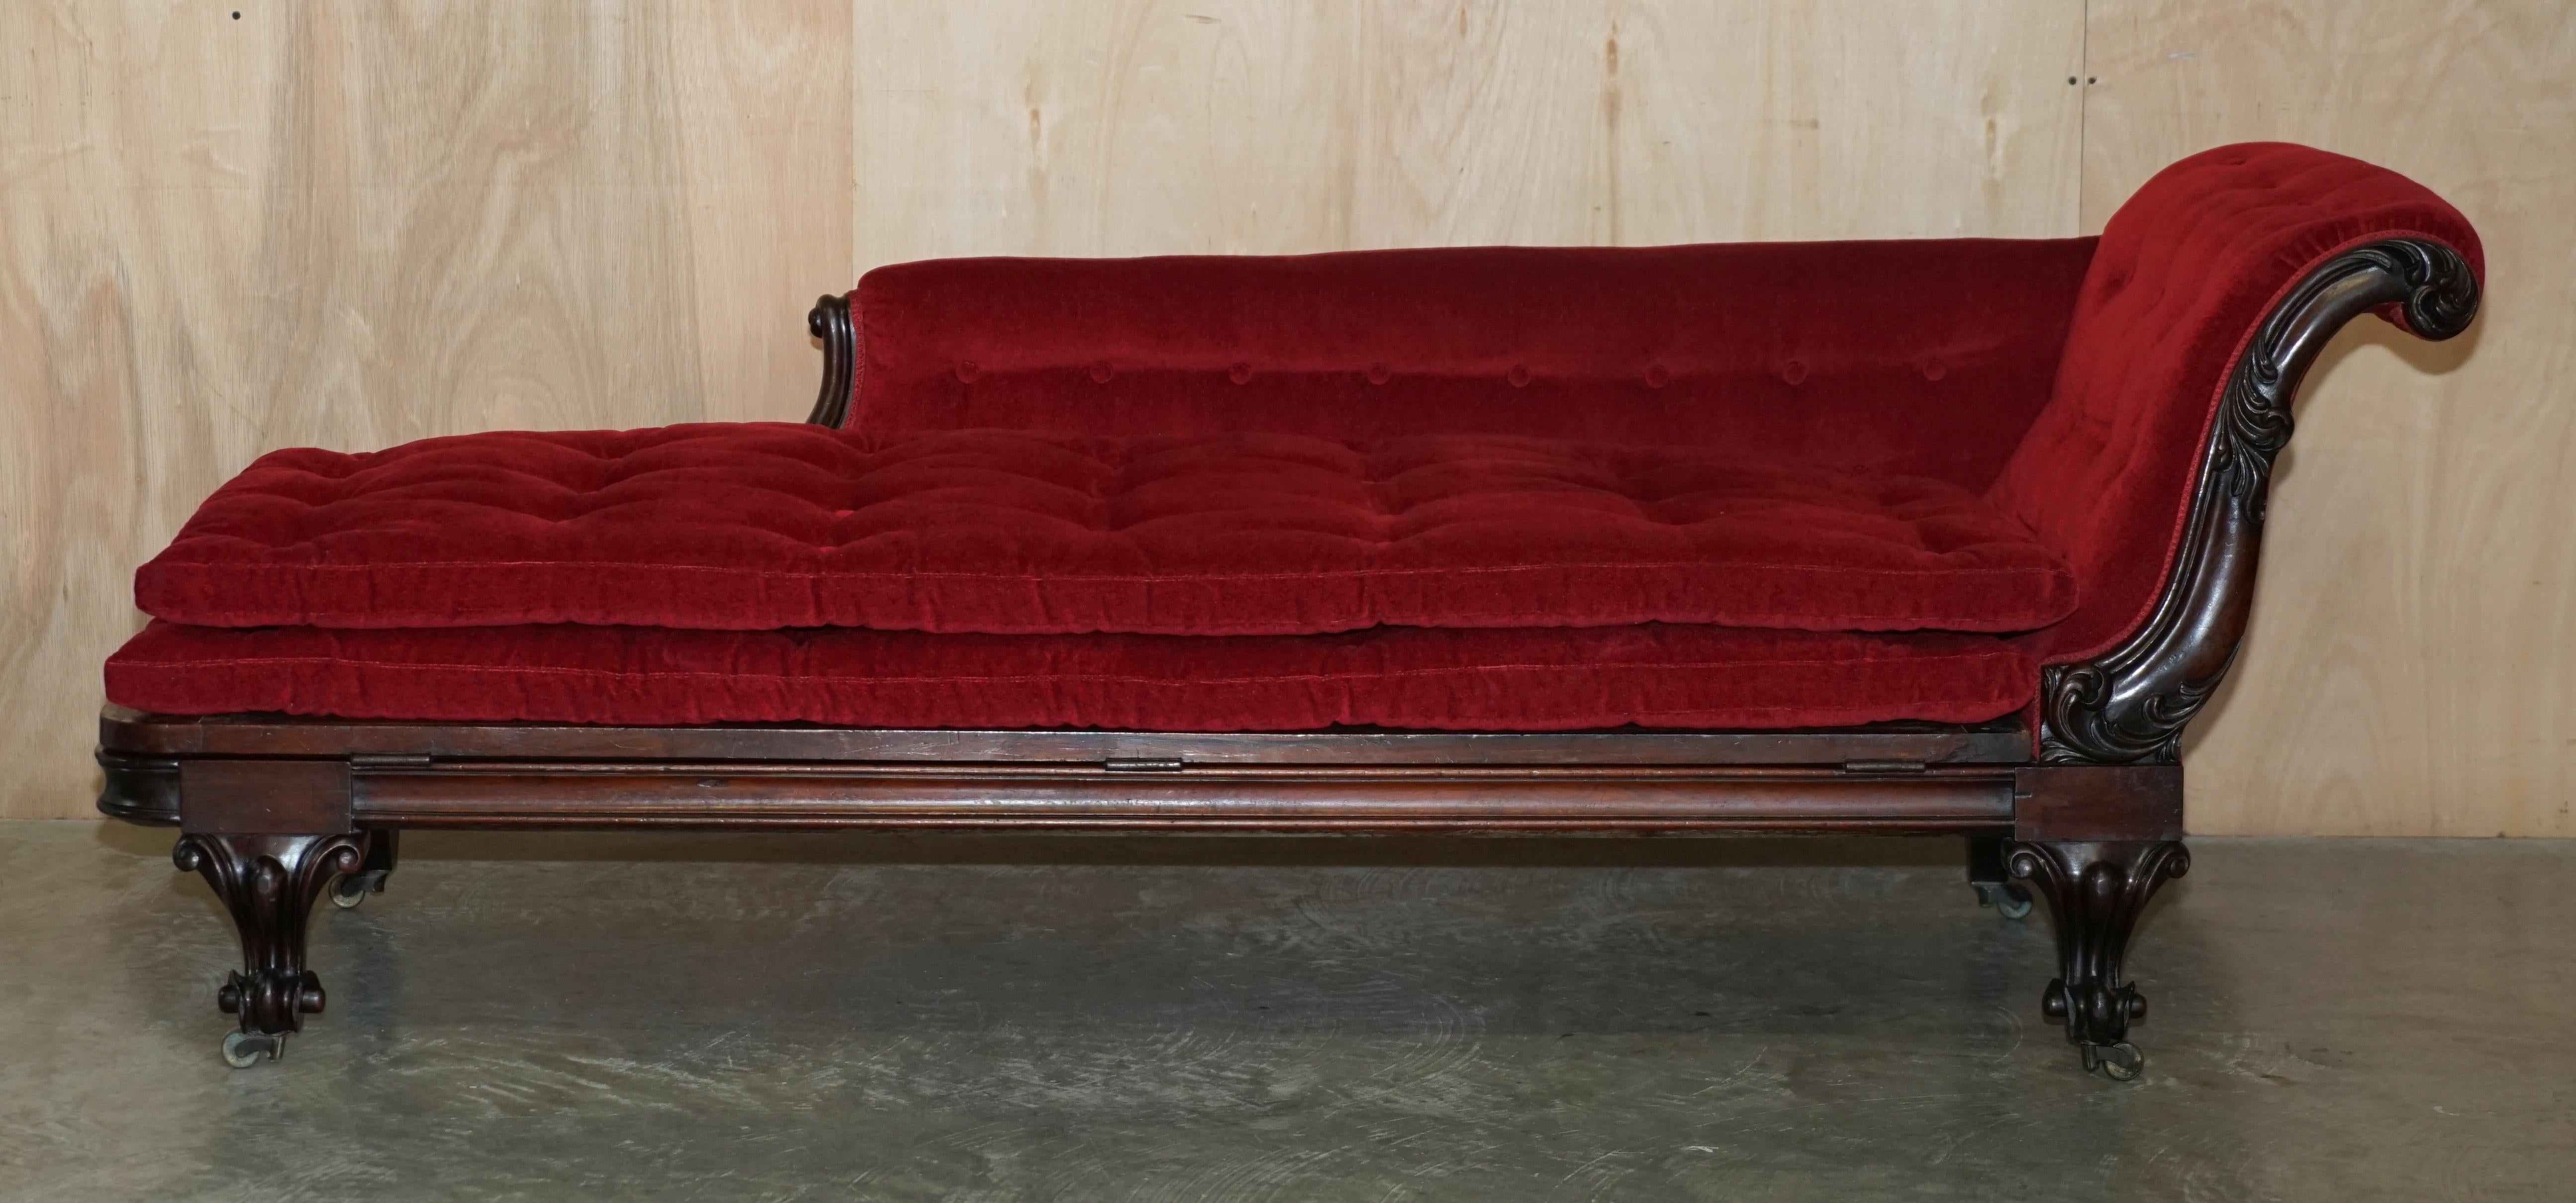 red victorian chaise lounge